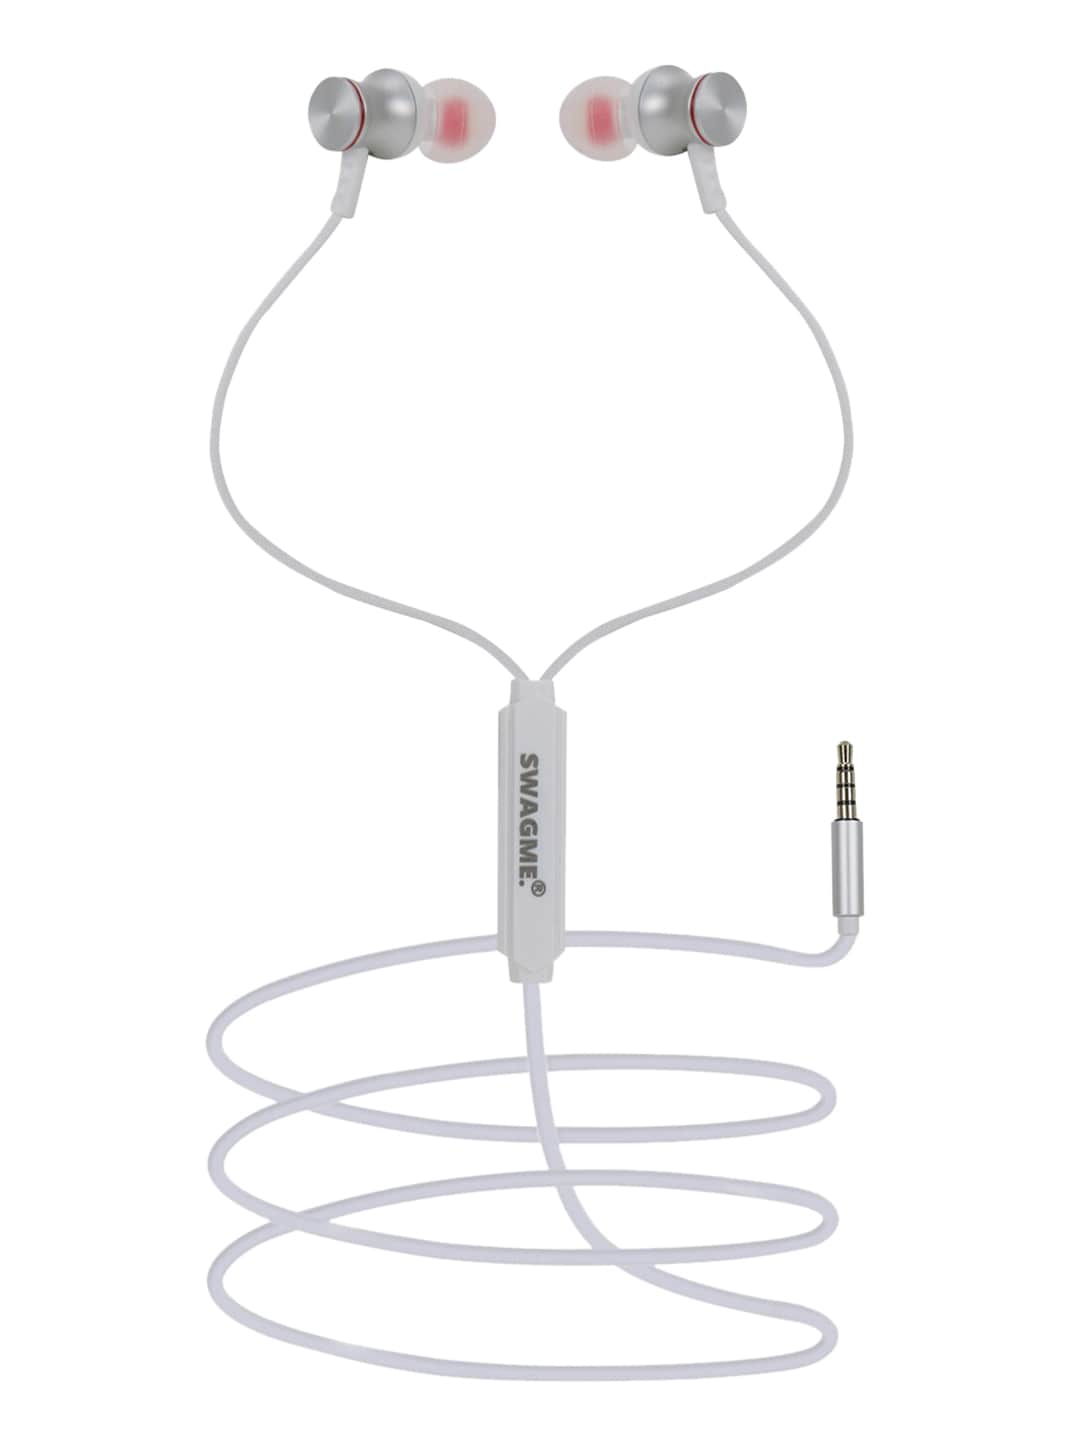 SWAGME White IE008 In-Ear Wired Earphones with Mic Price in India